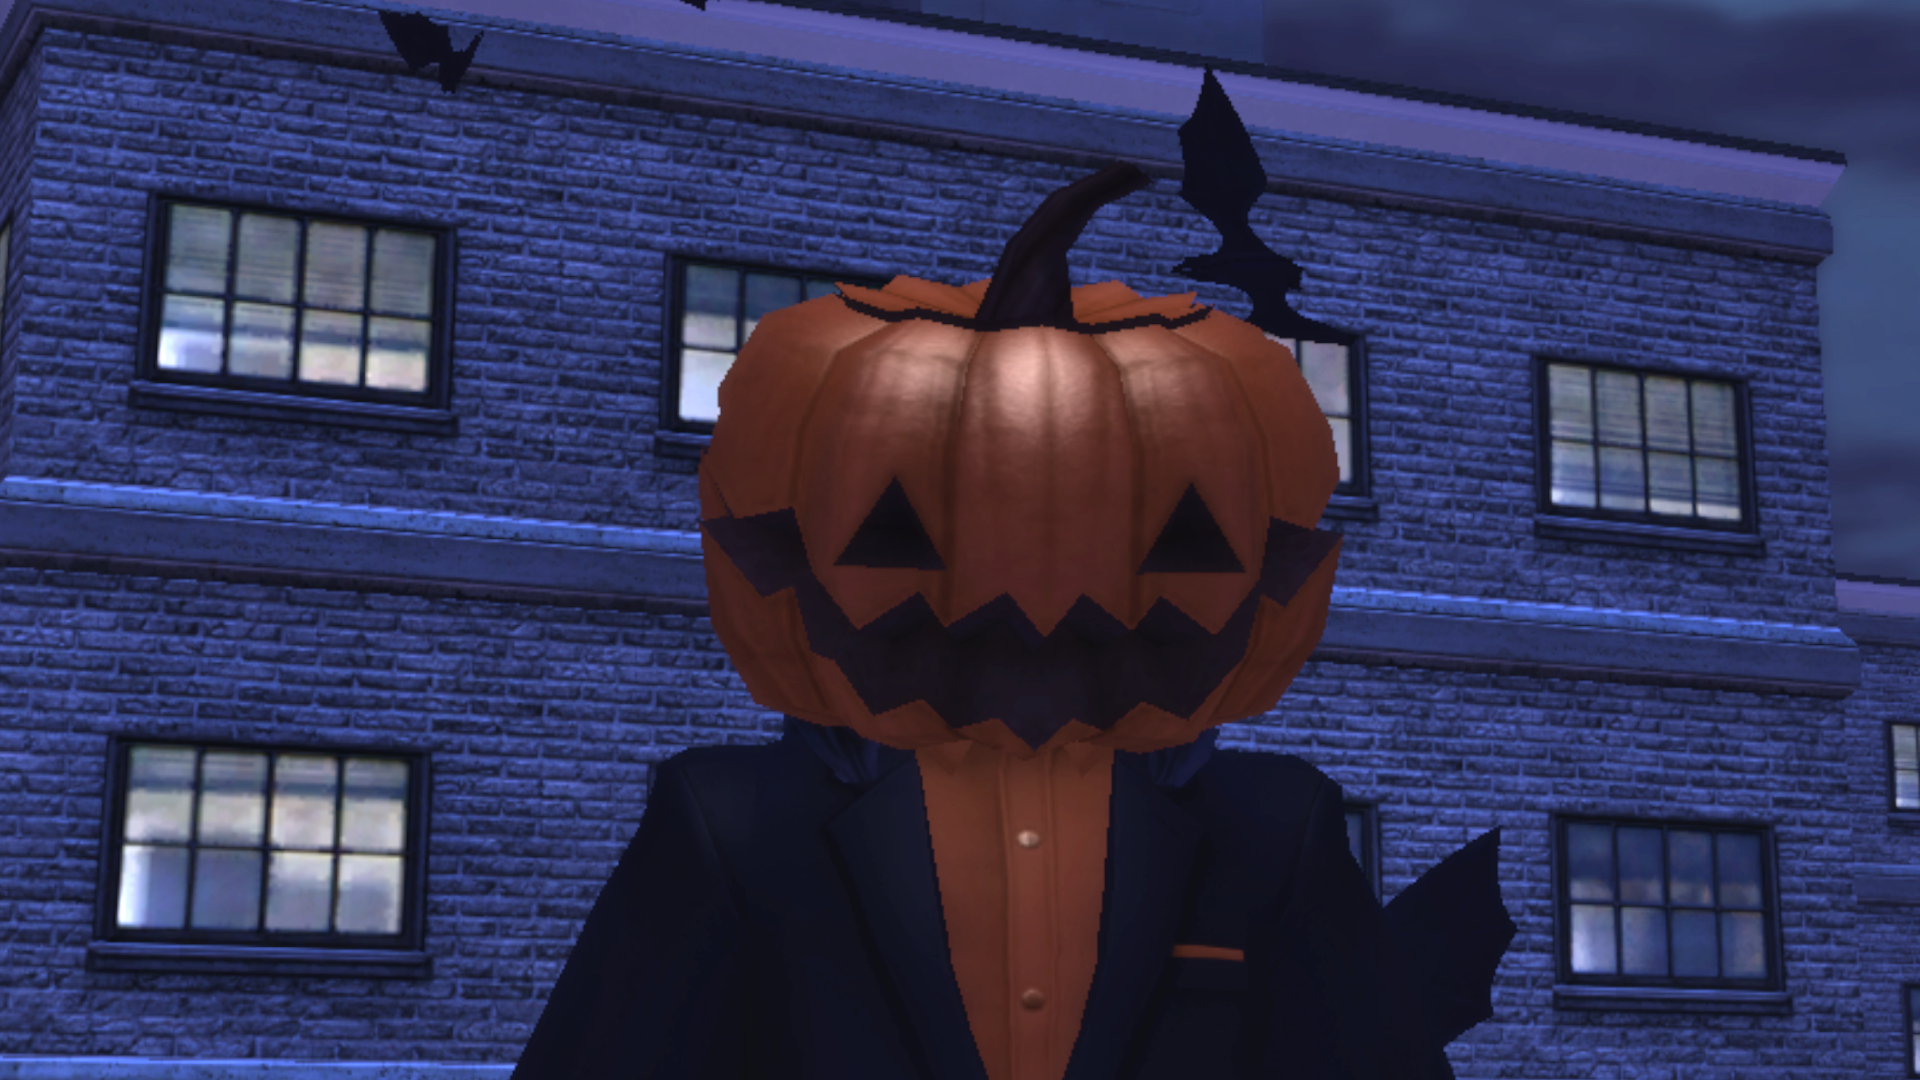 It’s been over a decade since it was shut down, but still—no MMO captures the Halloween spirit quite like City of Heroes